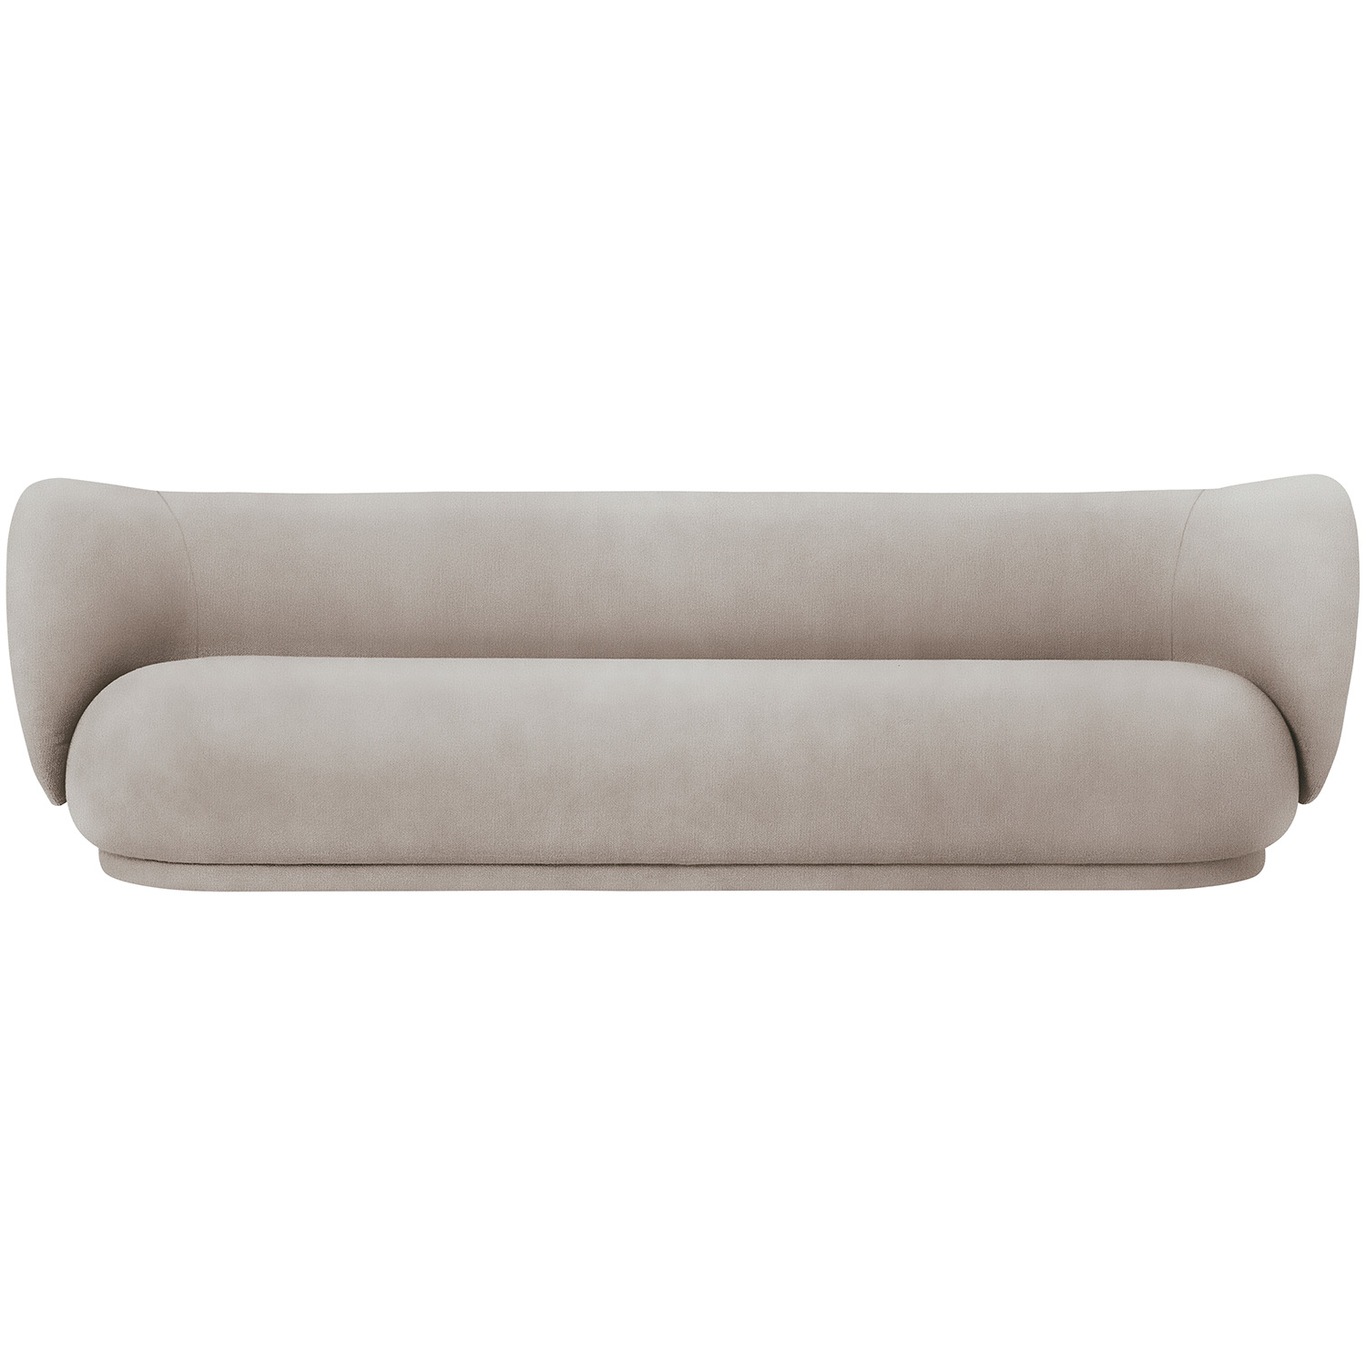 Rico Brushed 4-Personers Sofa, Sand